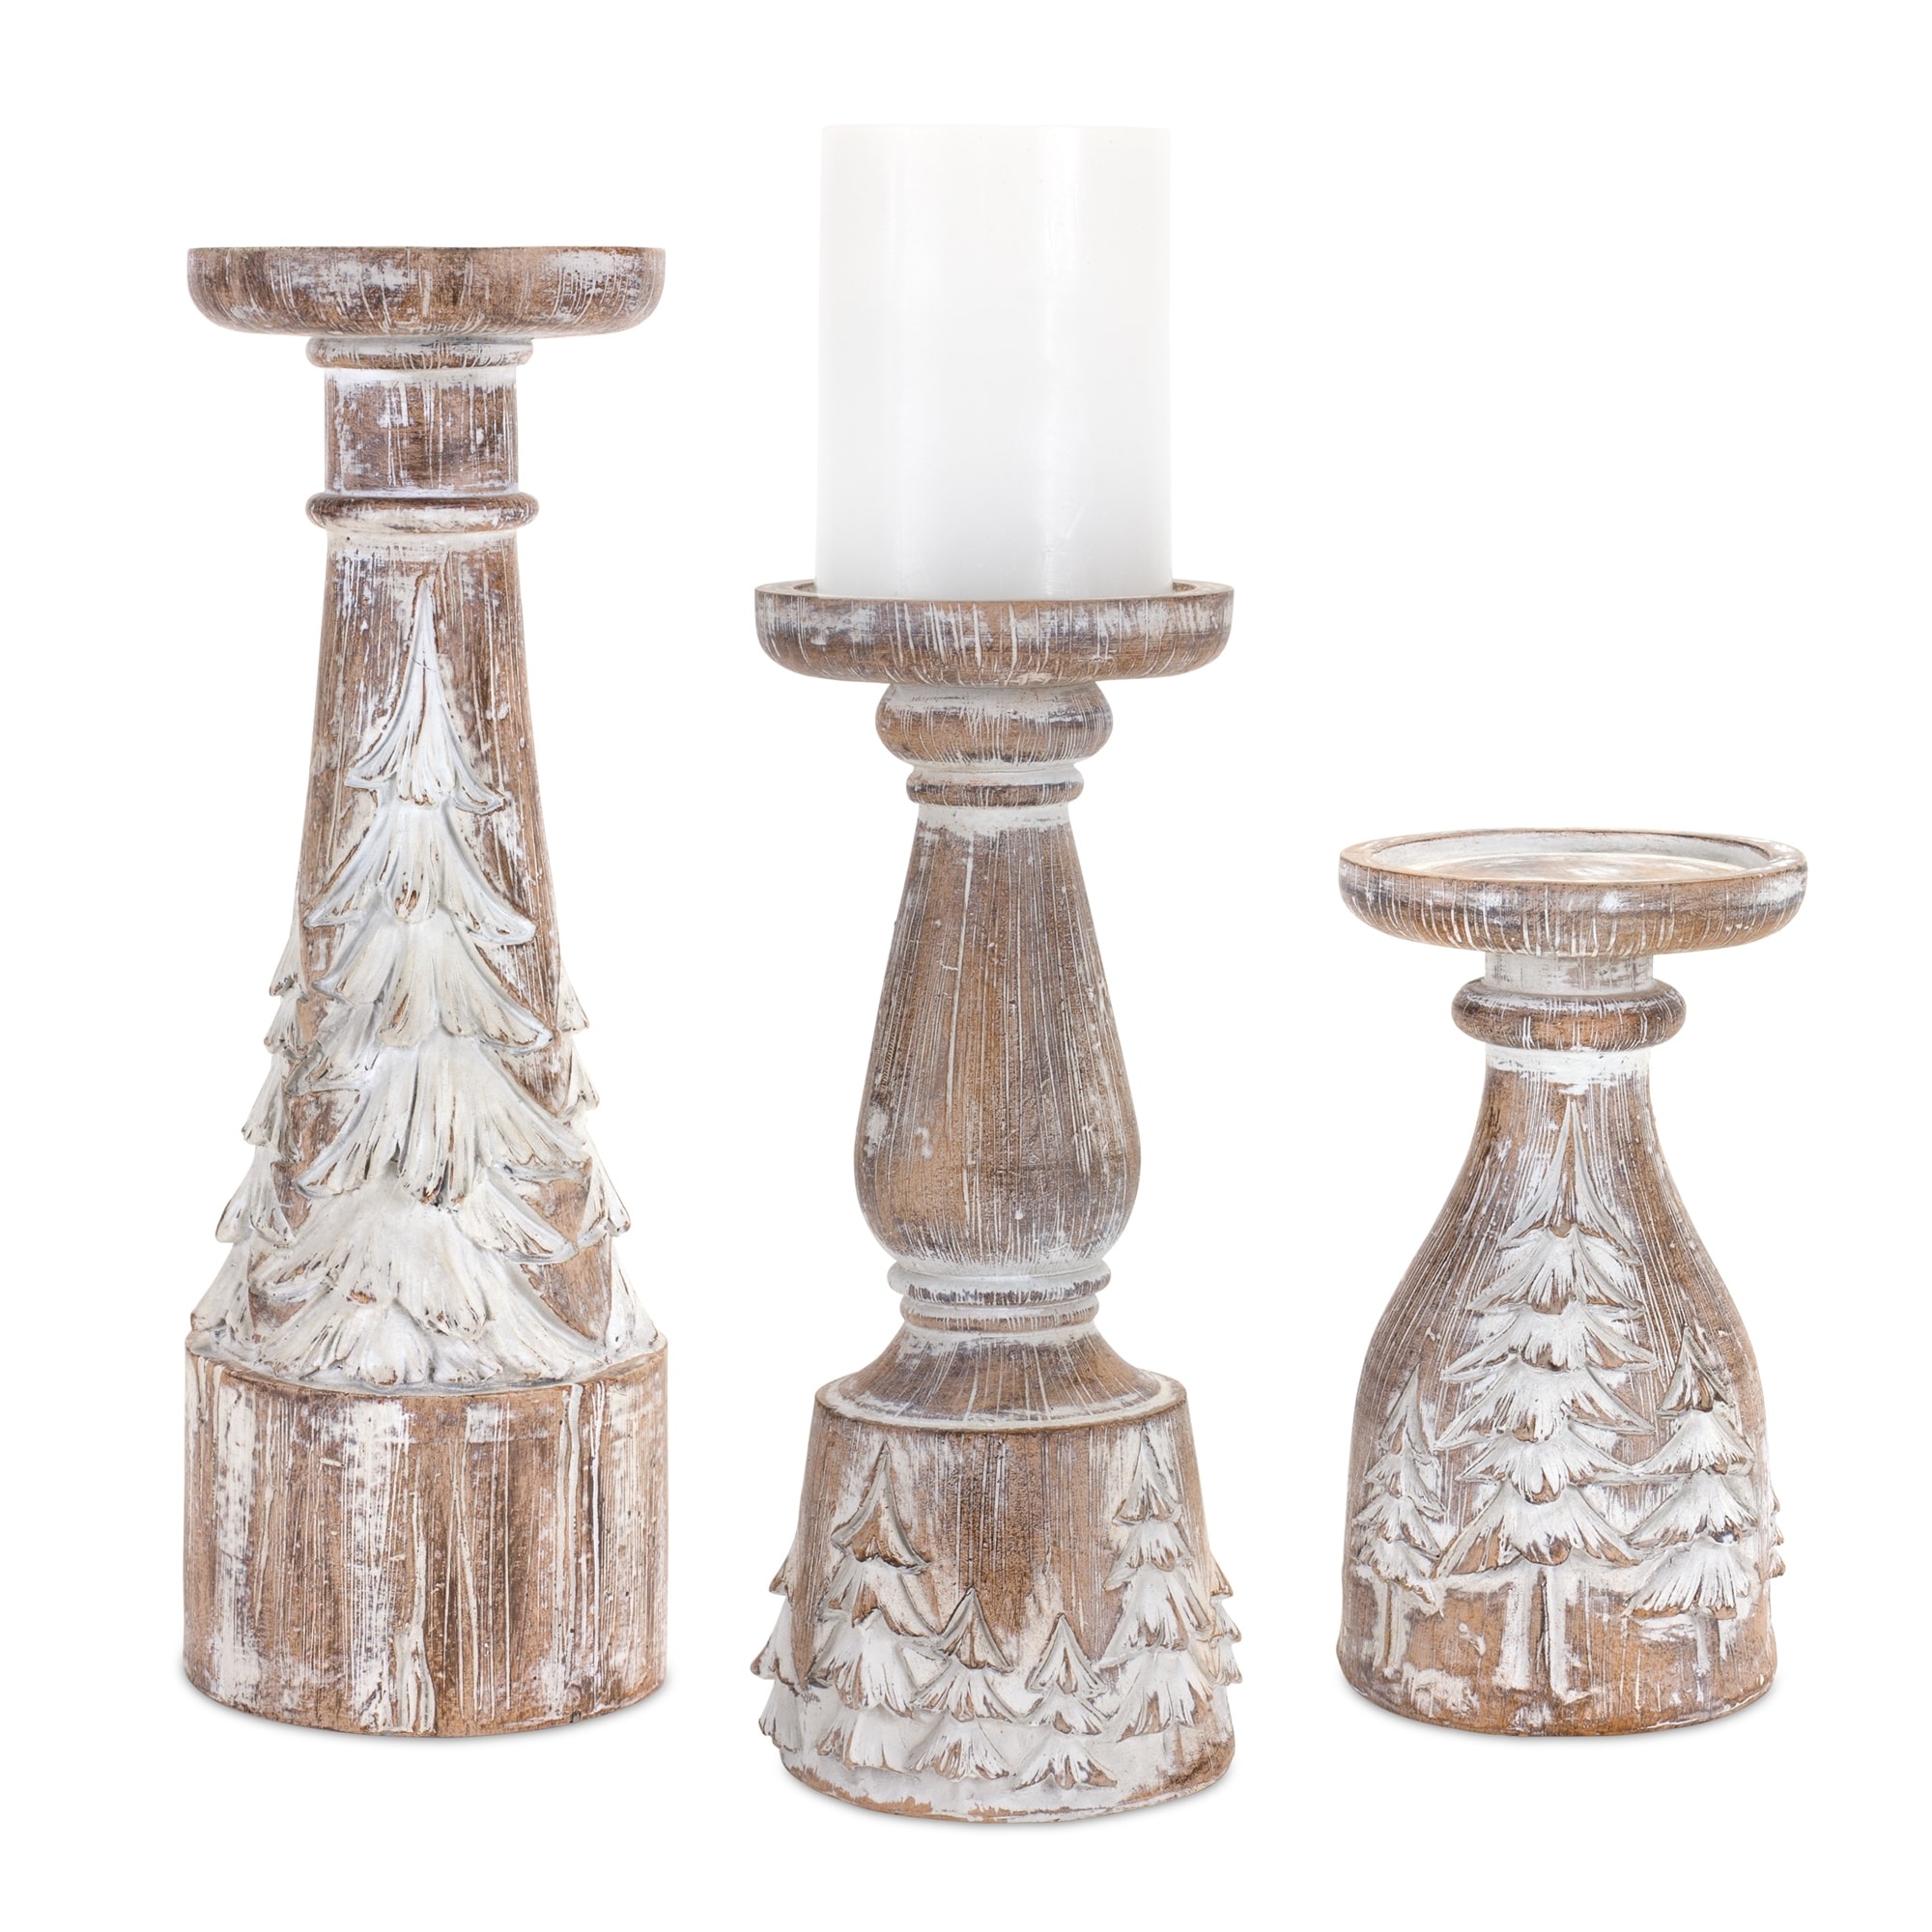 Candle Holder (Set of 3) - 4"L x 4"W x 7.25"H